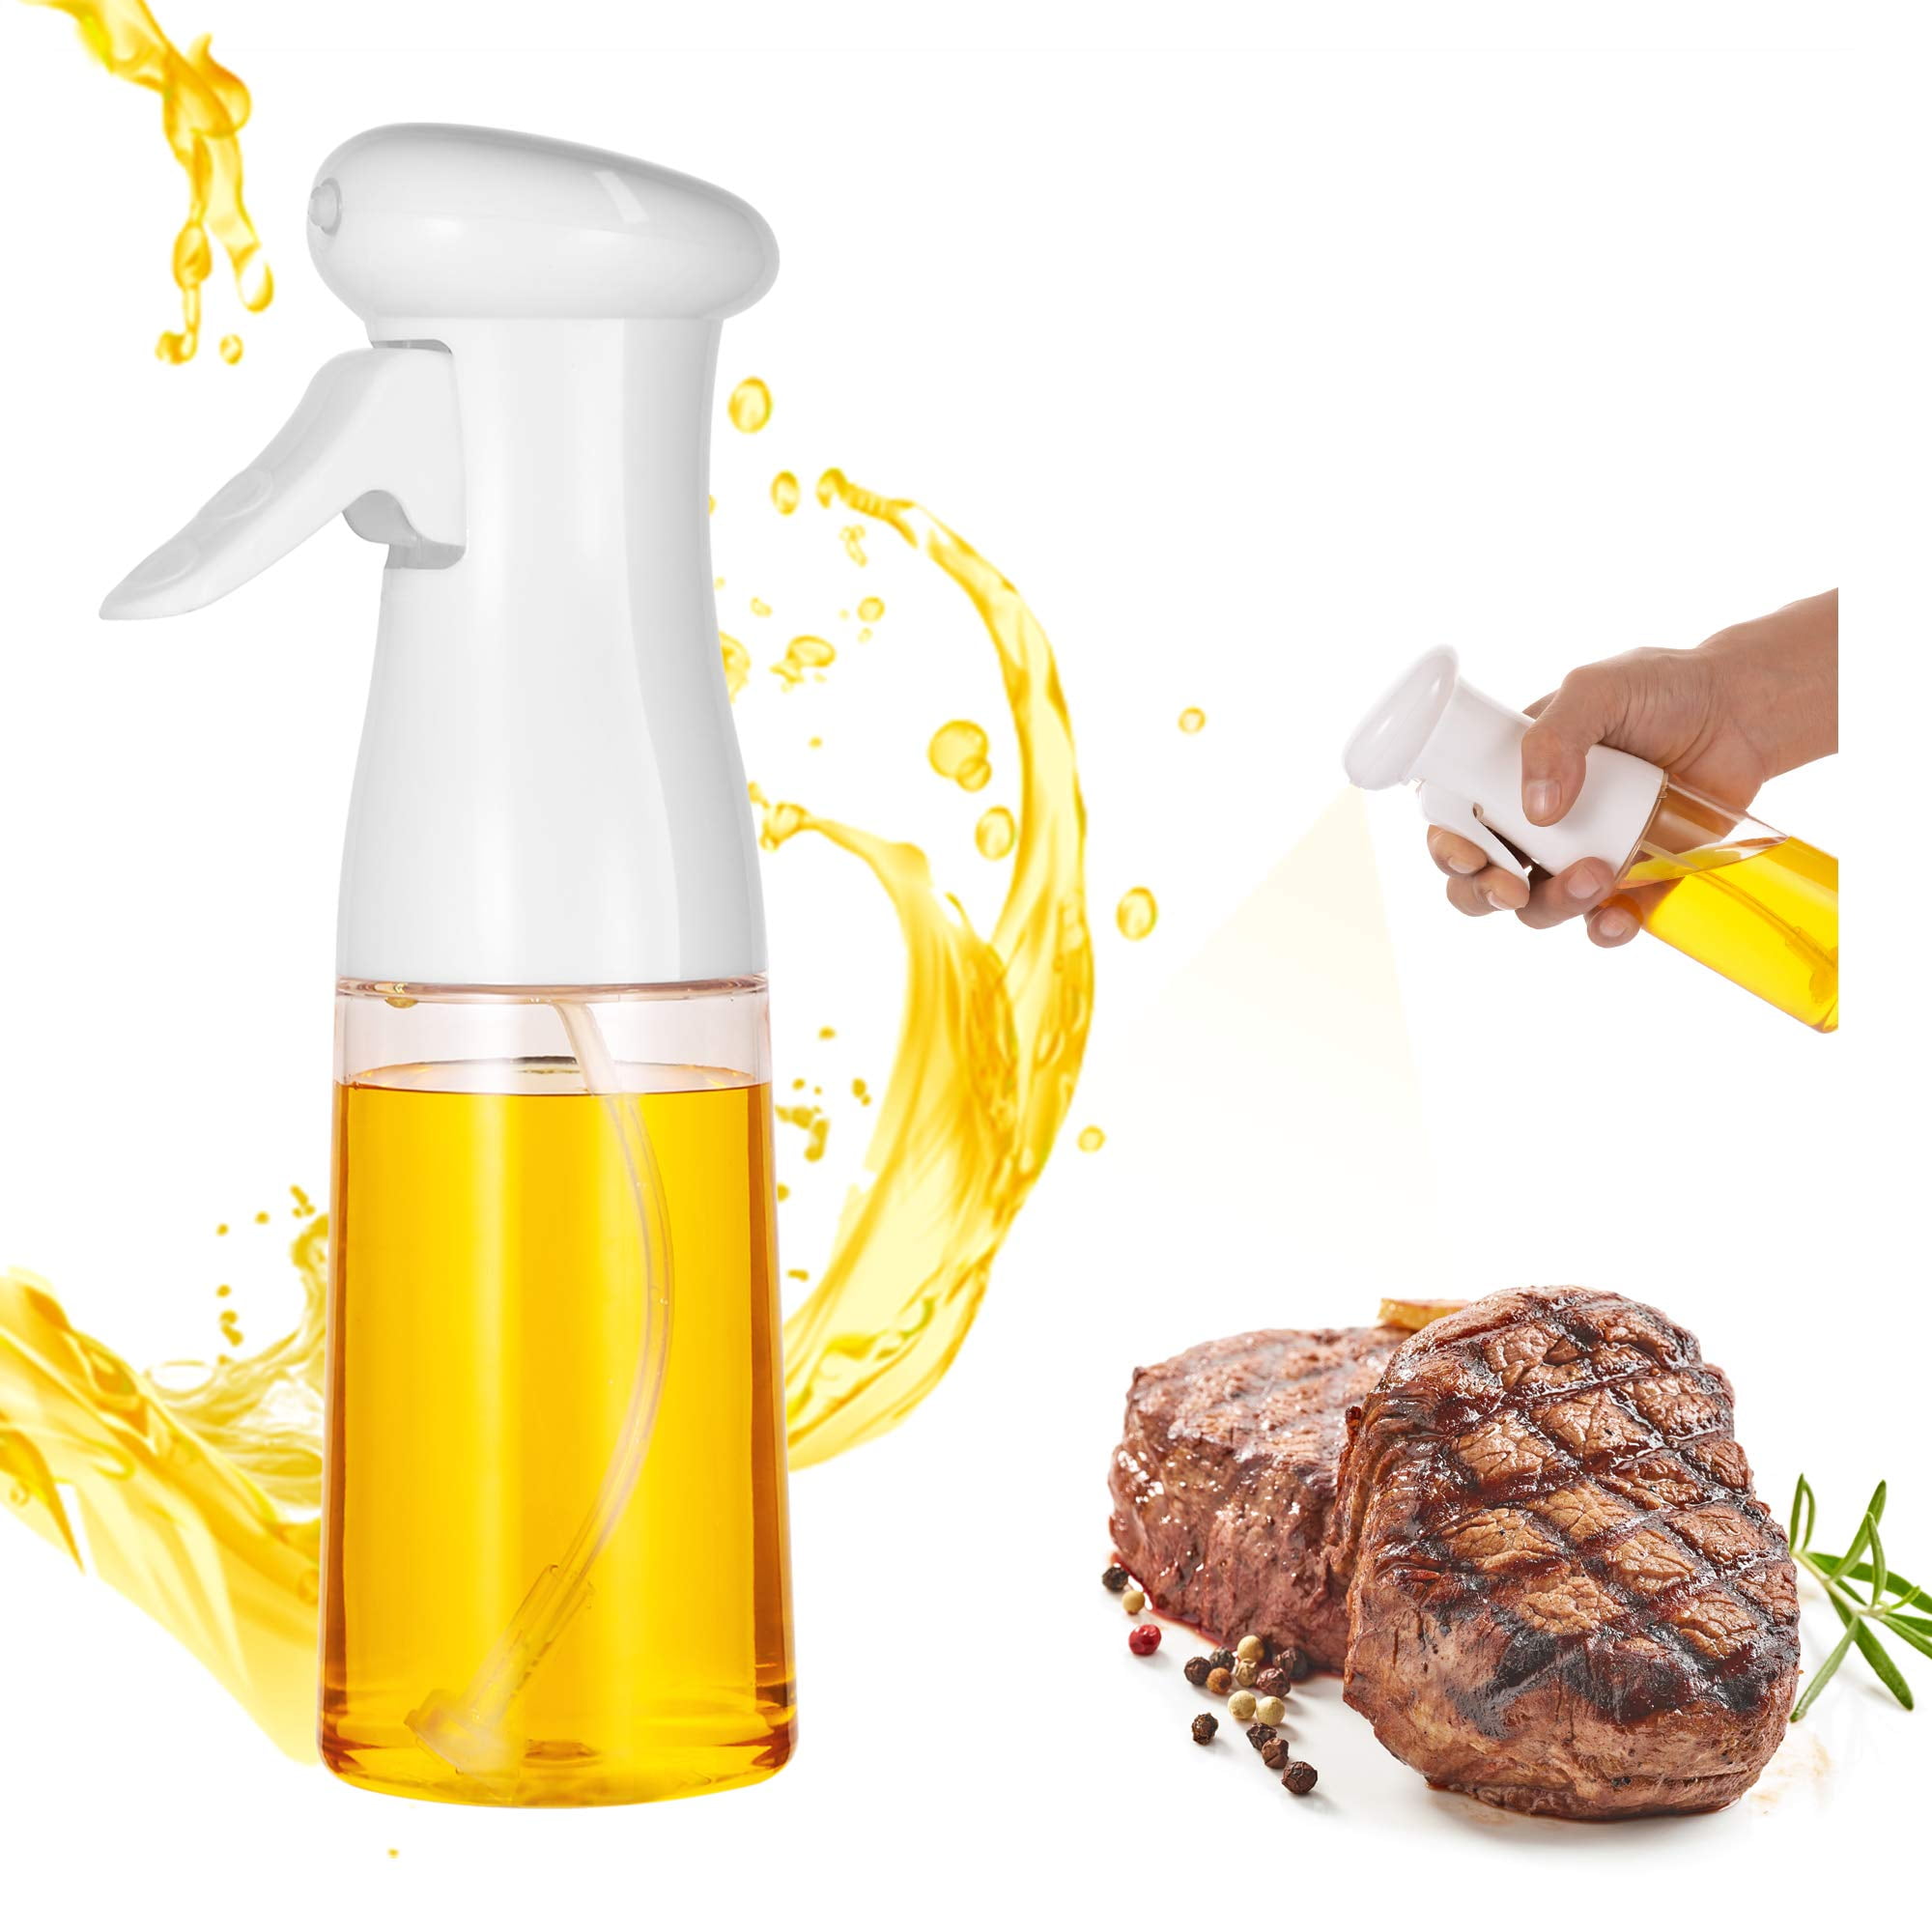 CBGGQ Olive Oil Sprayer, Oil Spray for Cooking, BBQ Cooking Spray Bottle, 7  oz / 210 ml Oil Sprayer Bottle, for Kitchen, Cooking, BBQ, Baking